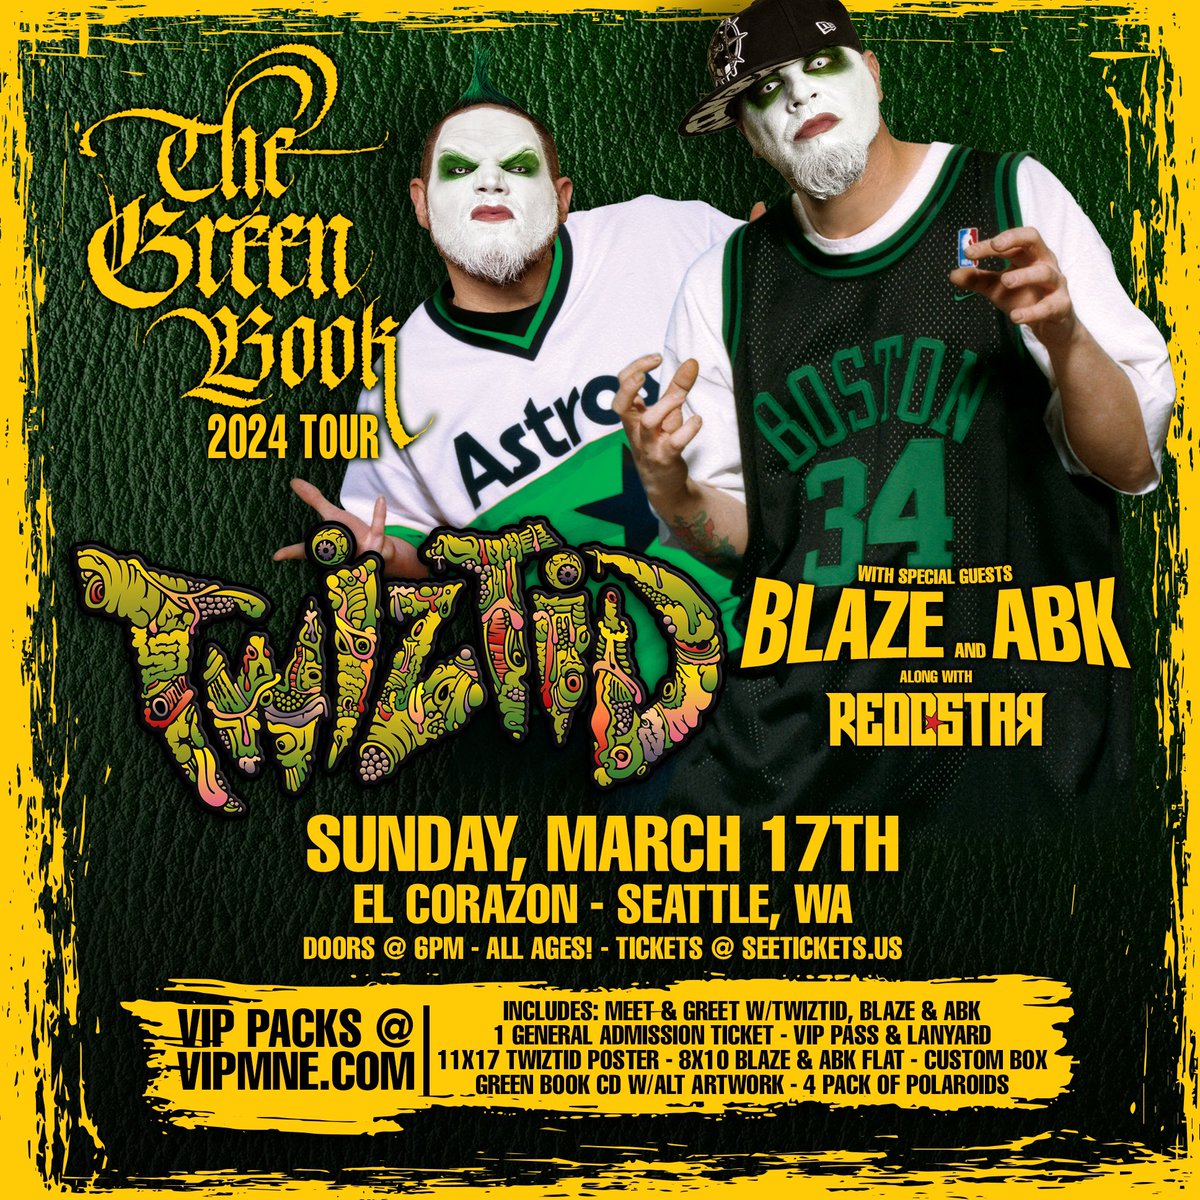 Get ready for @tweetmesohard ‘s “The Green Book” tour to hit Seattle, Sunday March 17th‼️ El Corazon is the place to be for Twiztid and special guests including @BlazeYaDead1 , @Abkwarrior and @REDDSTARmusic 😈 Find out more at VIPMNE.com 📗